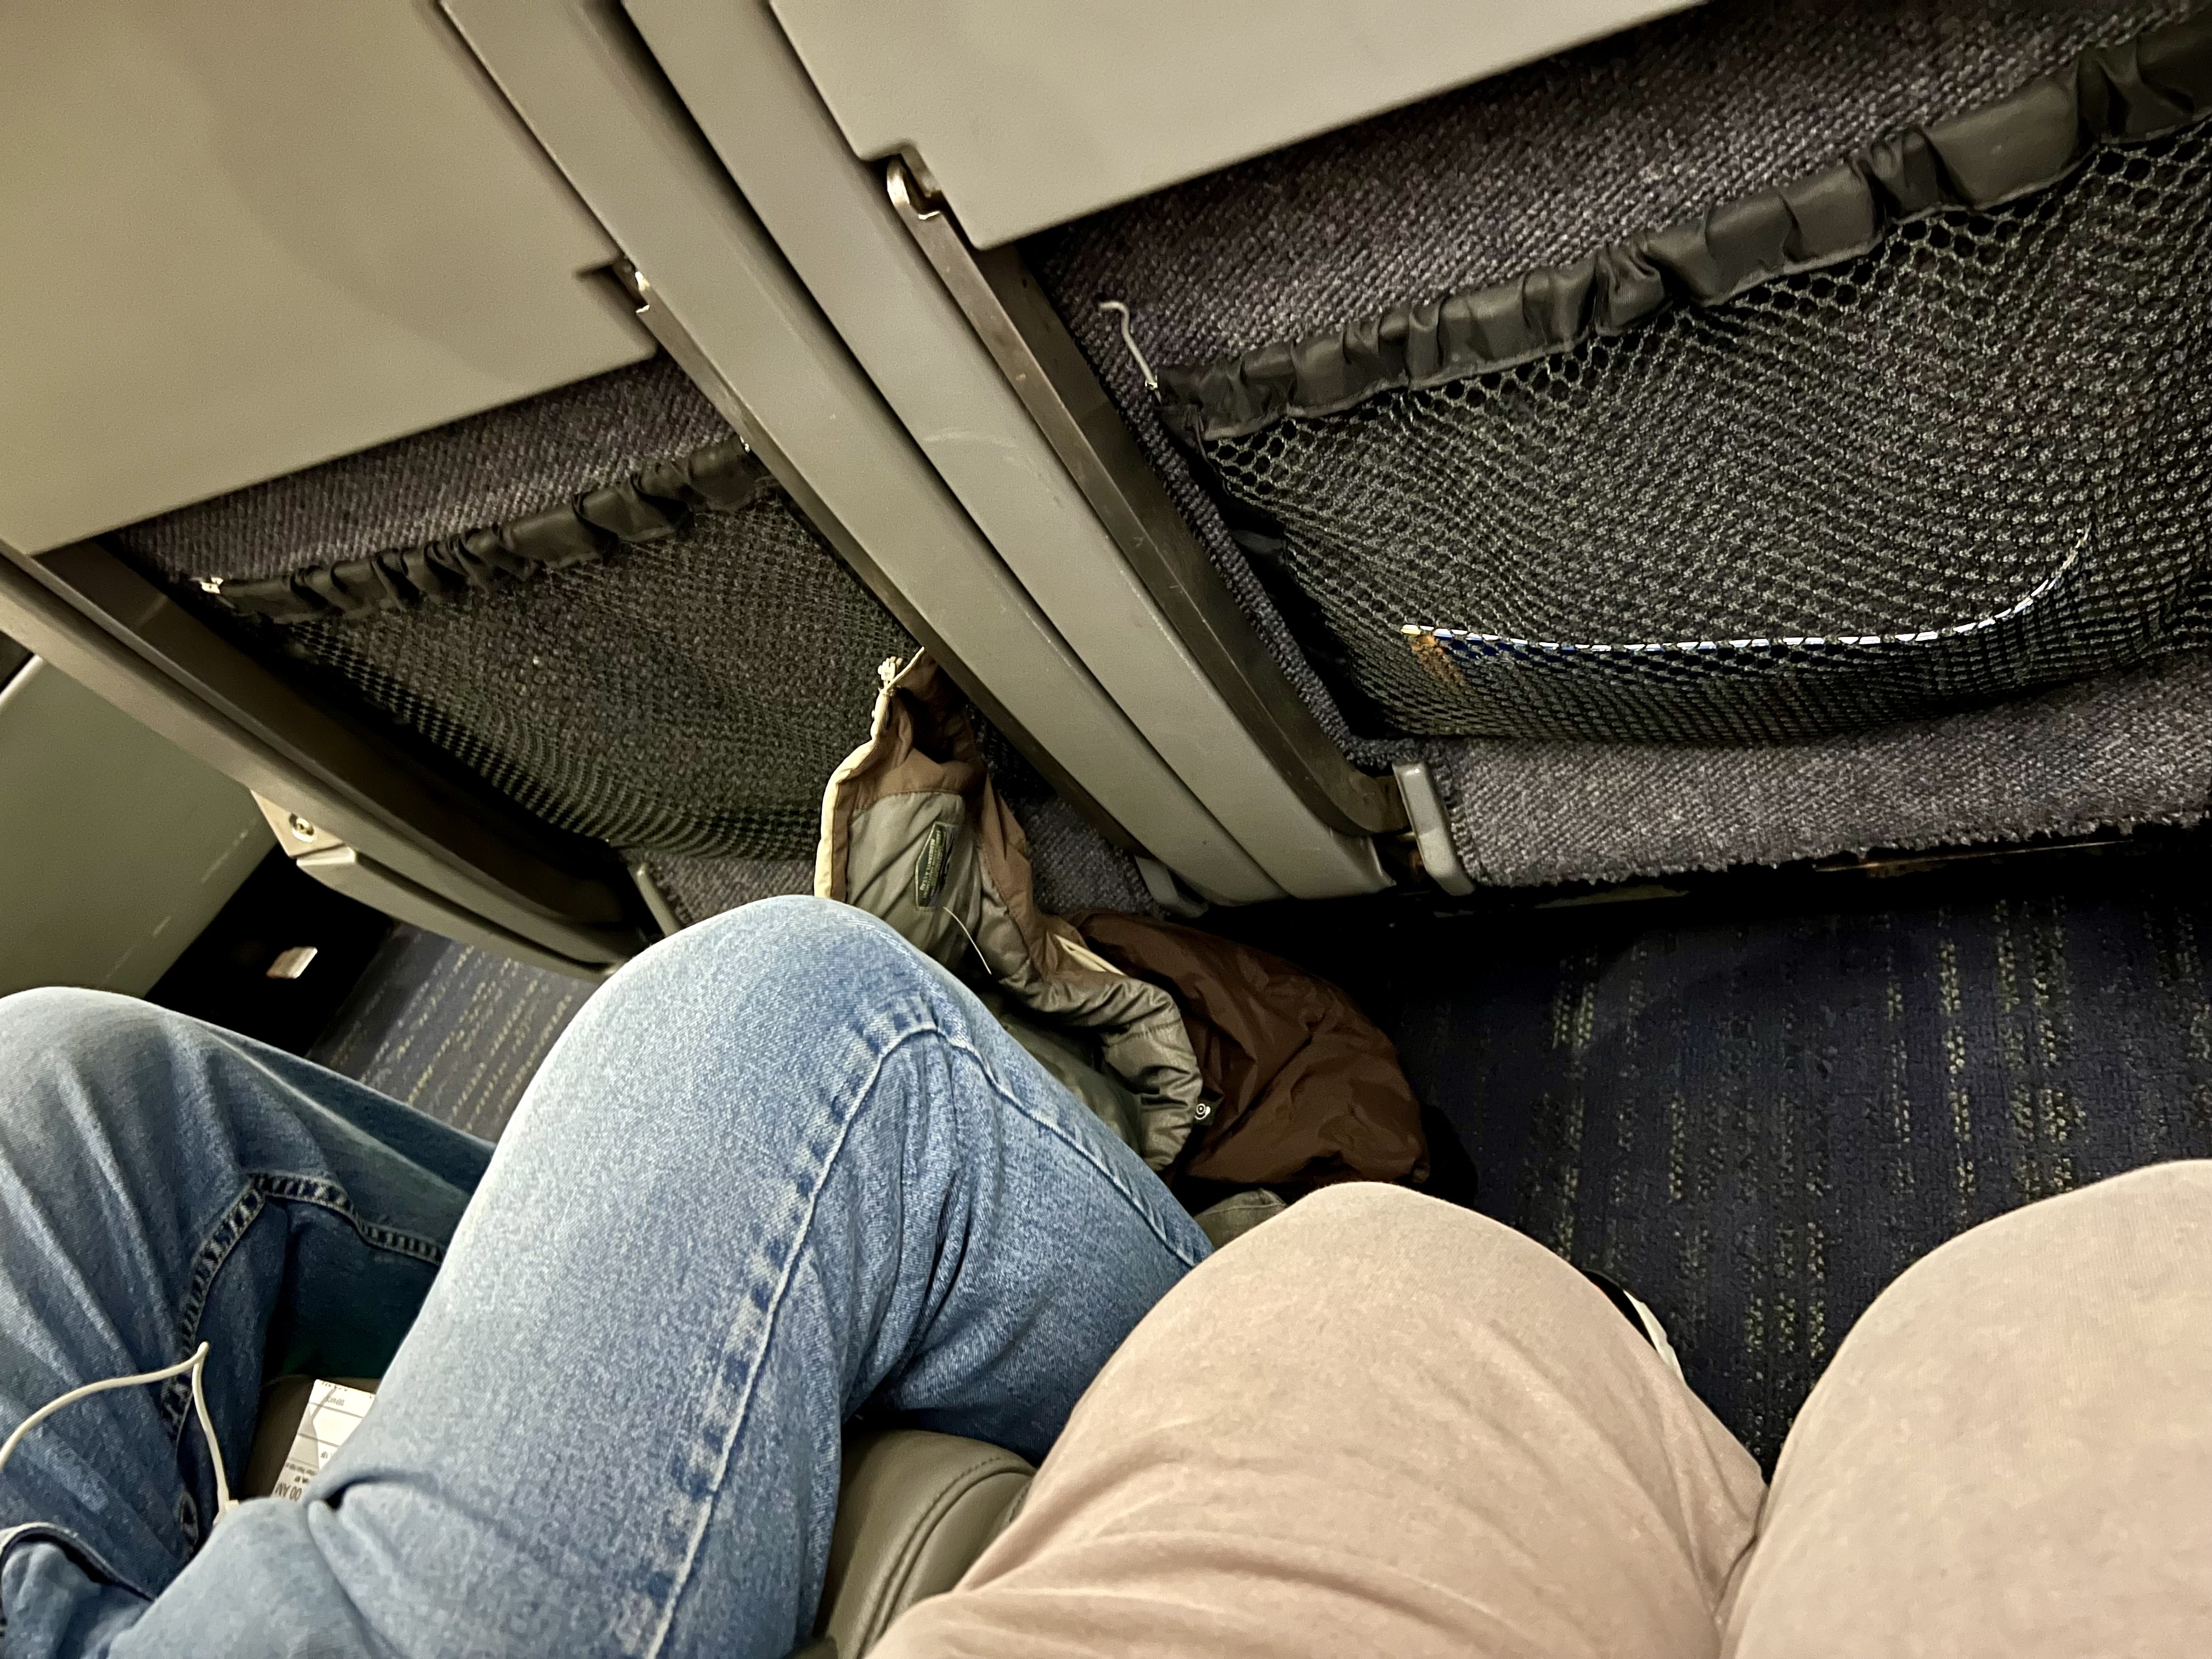 a person's legs and feet on a plane